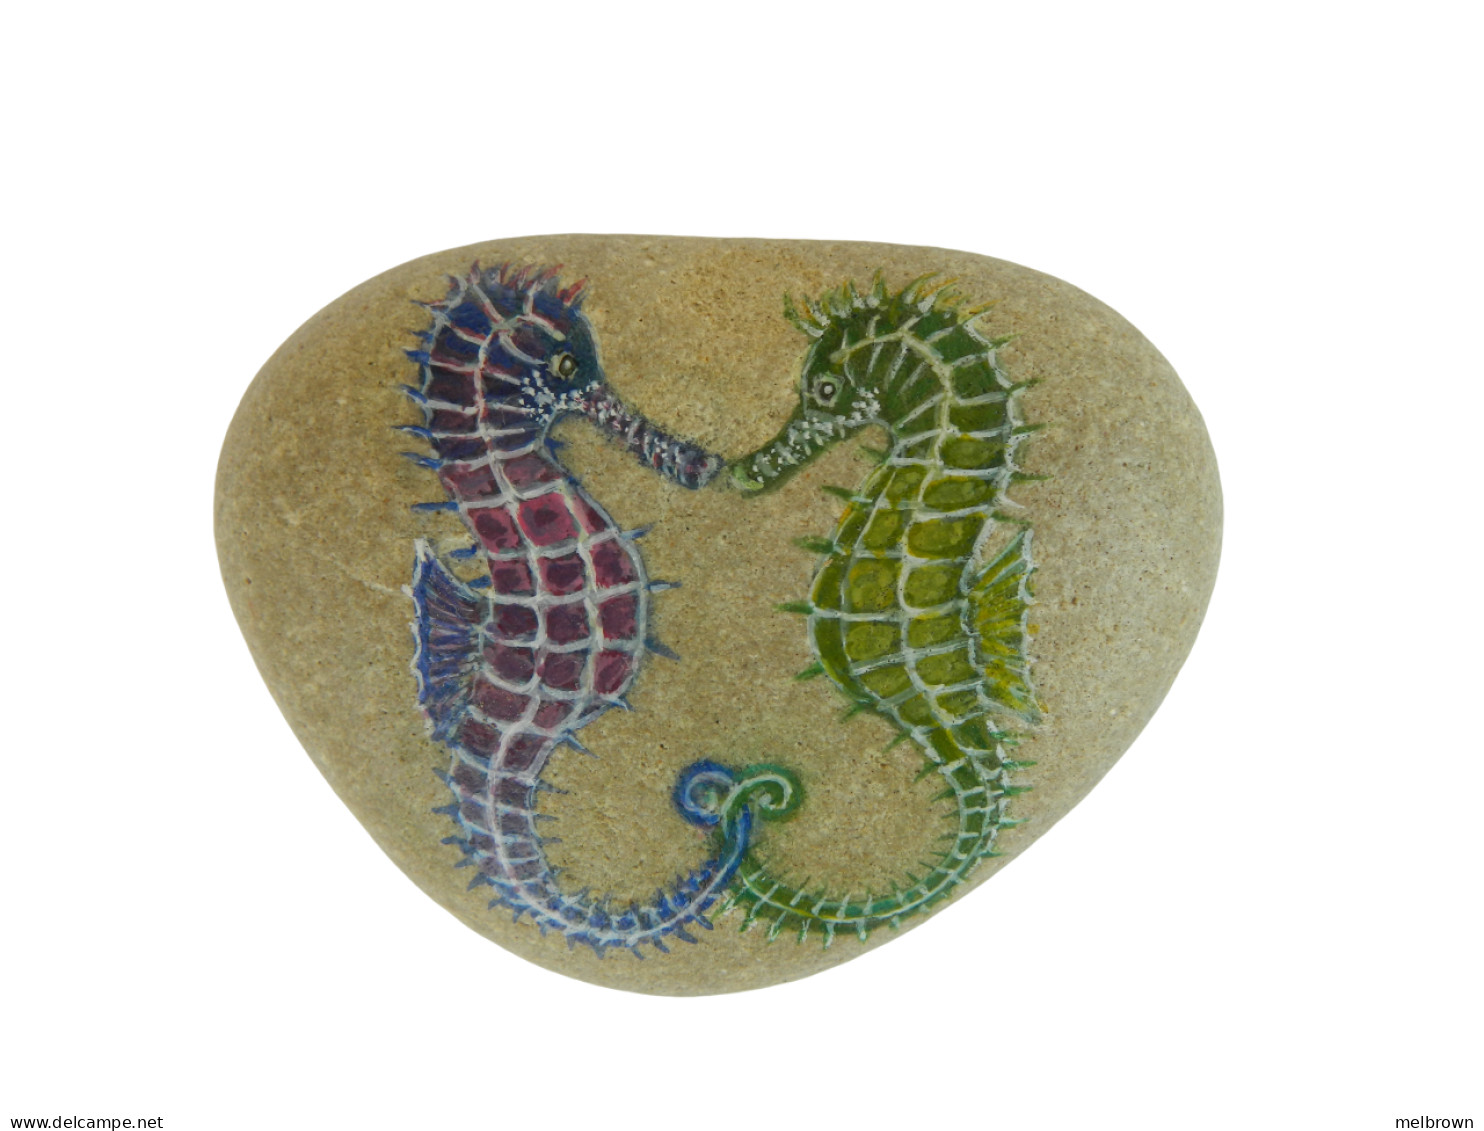 Seahorses Hand Painted On A Heart-Shaped Beach Stone Paperweight - Dieren